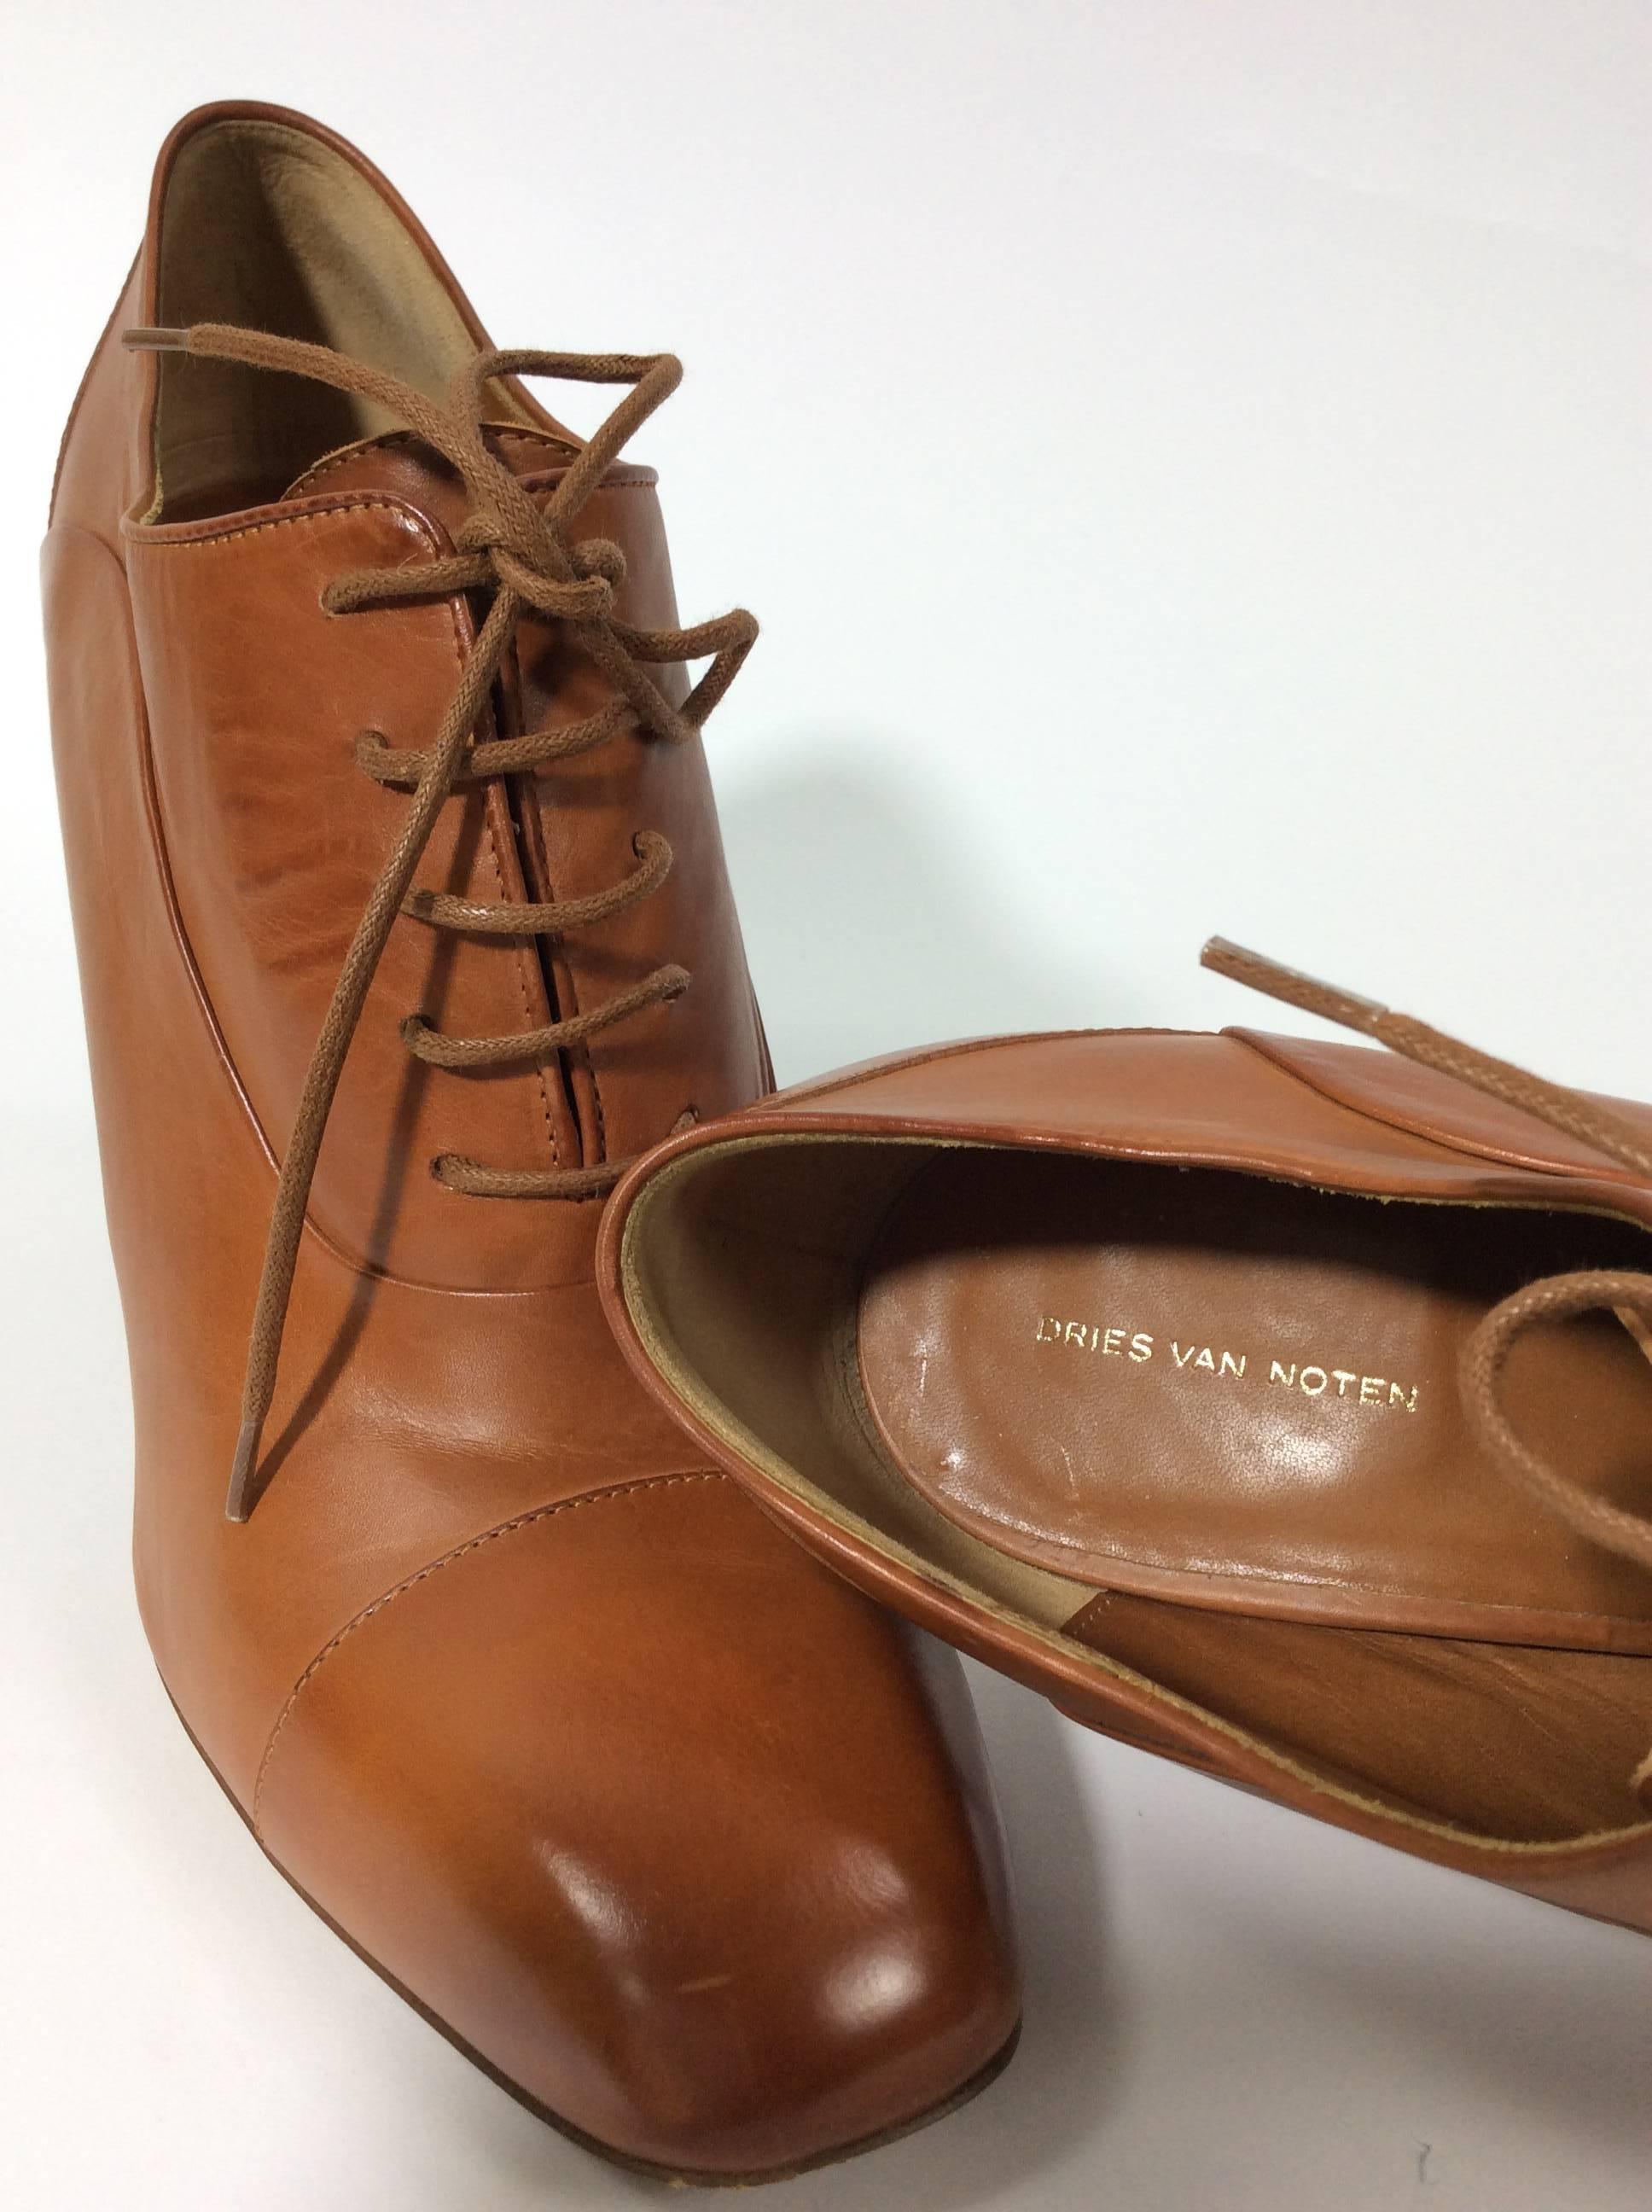 Tan Lace Up Bootie
4.5 inch heel
3 inch sole width
Lace up front closure
Size 40.5 (equates to US 9.5)
Leather sole, upper, and lining